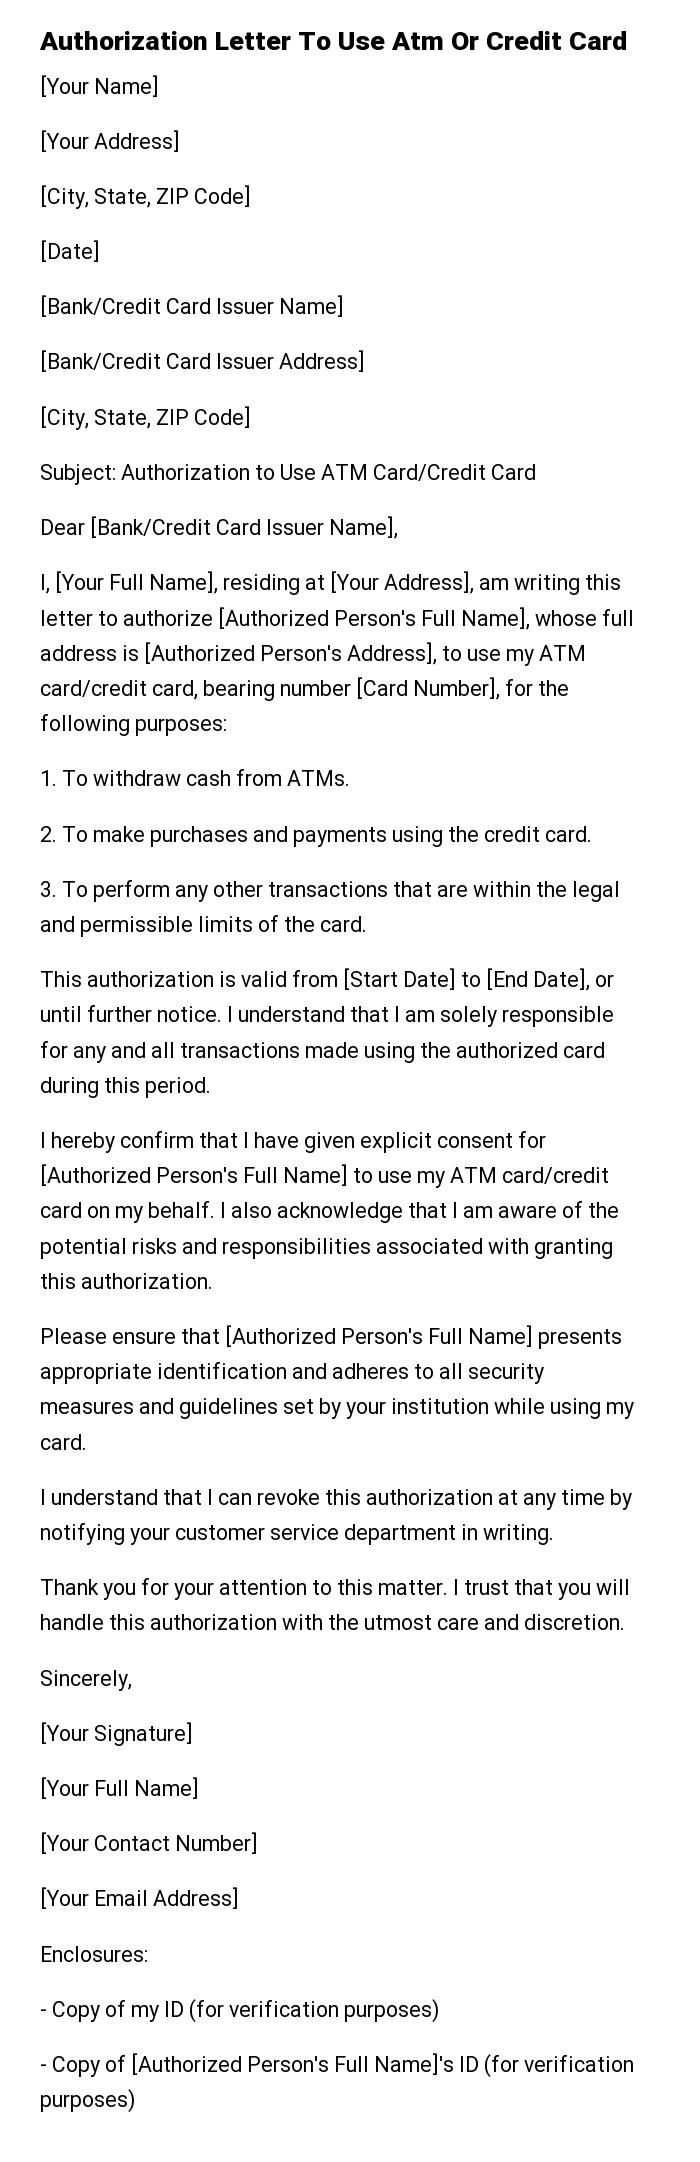 Authorization Letter To Use Atm Or Credit Card